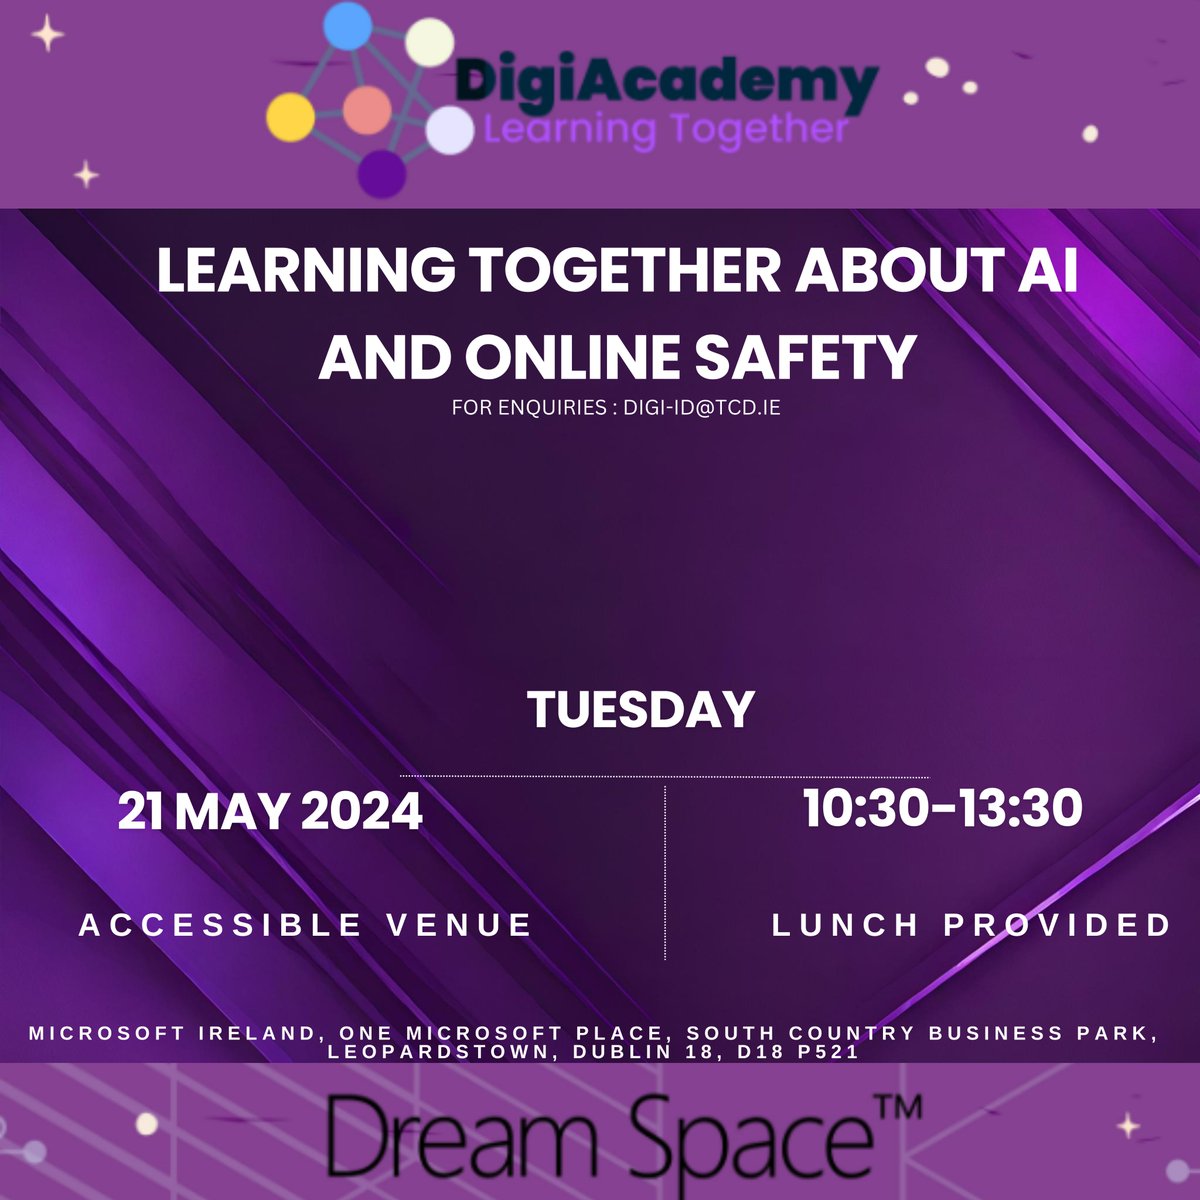 🎉Join us for a transformative experience in #inclusiveeducation. Learn about our ground-breaking resources, meet our teachers, and explore interactive activities on #onlinesafety and #AI at #MSDreamSpace. Save the date: 21 May 2024, 10:30AM-13:30PM. Lunch provided! 🍕